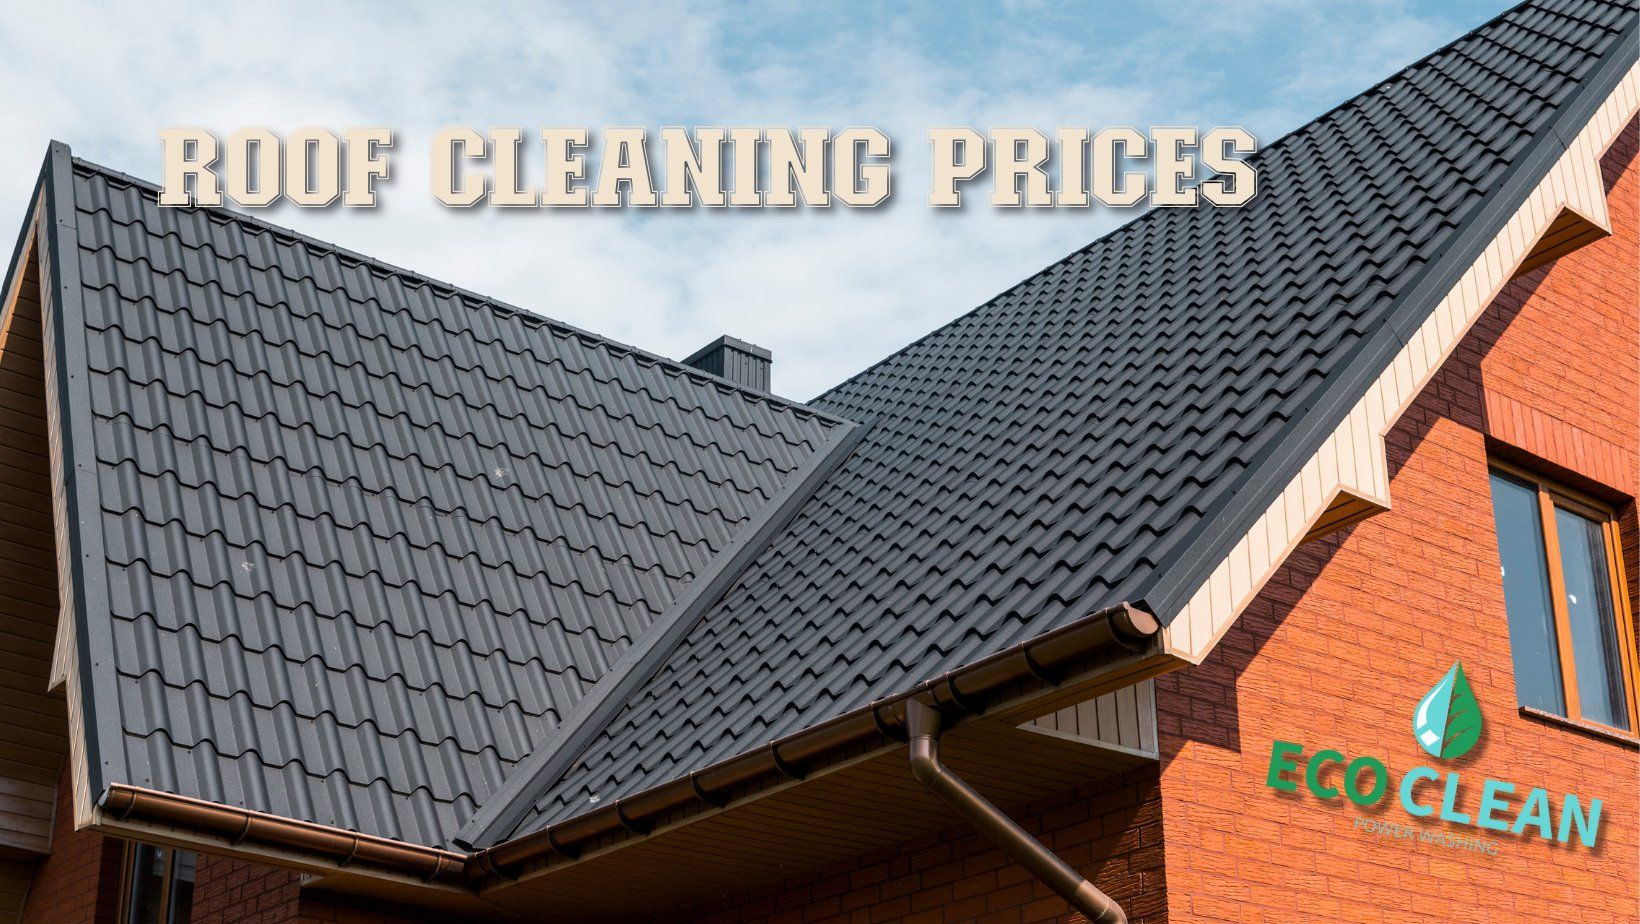 A picture of a roof with the words roof cleaning prices on it